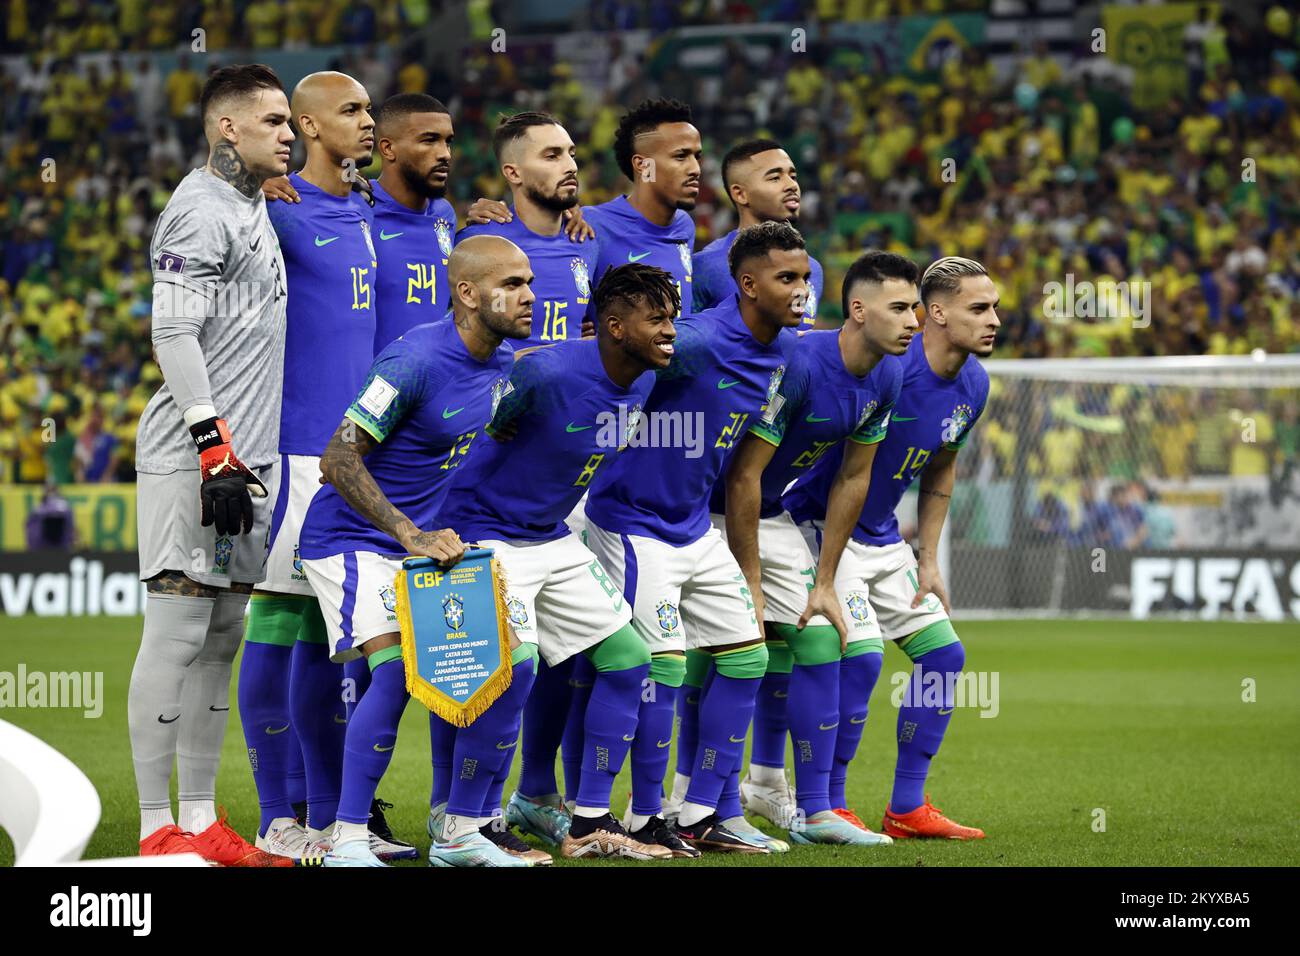 Qatar. 02nd Dec, 2022. LUSAIL CITY - Back row (lr) Brazil goalkeeper Emerson, Fabinho of Brazil, Gleison Bremer of Brazil, Alex Telles of Brazil, Eder Militao of Brazil, Gabriel Jesus of Brazil. Front row (l-r) Dani Alves of Brazil, Fred of Brazil, Rodrigo of Brazil, Vinicius Junior of Brazil, Antony of Brazil during the FIFA World Cup Qatar 2022 group G match between Cameroon and Brazil at Lusail Stadium on December 2, 2022 in Lusail City, Qatar. AP | Dutch Height | MAURICE OF STONE Credit: ANP/Alamy Live News Stock Photo